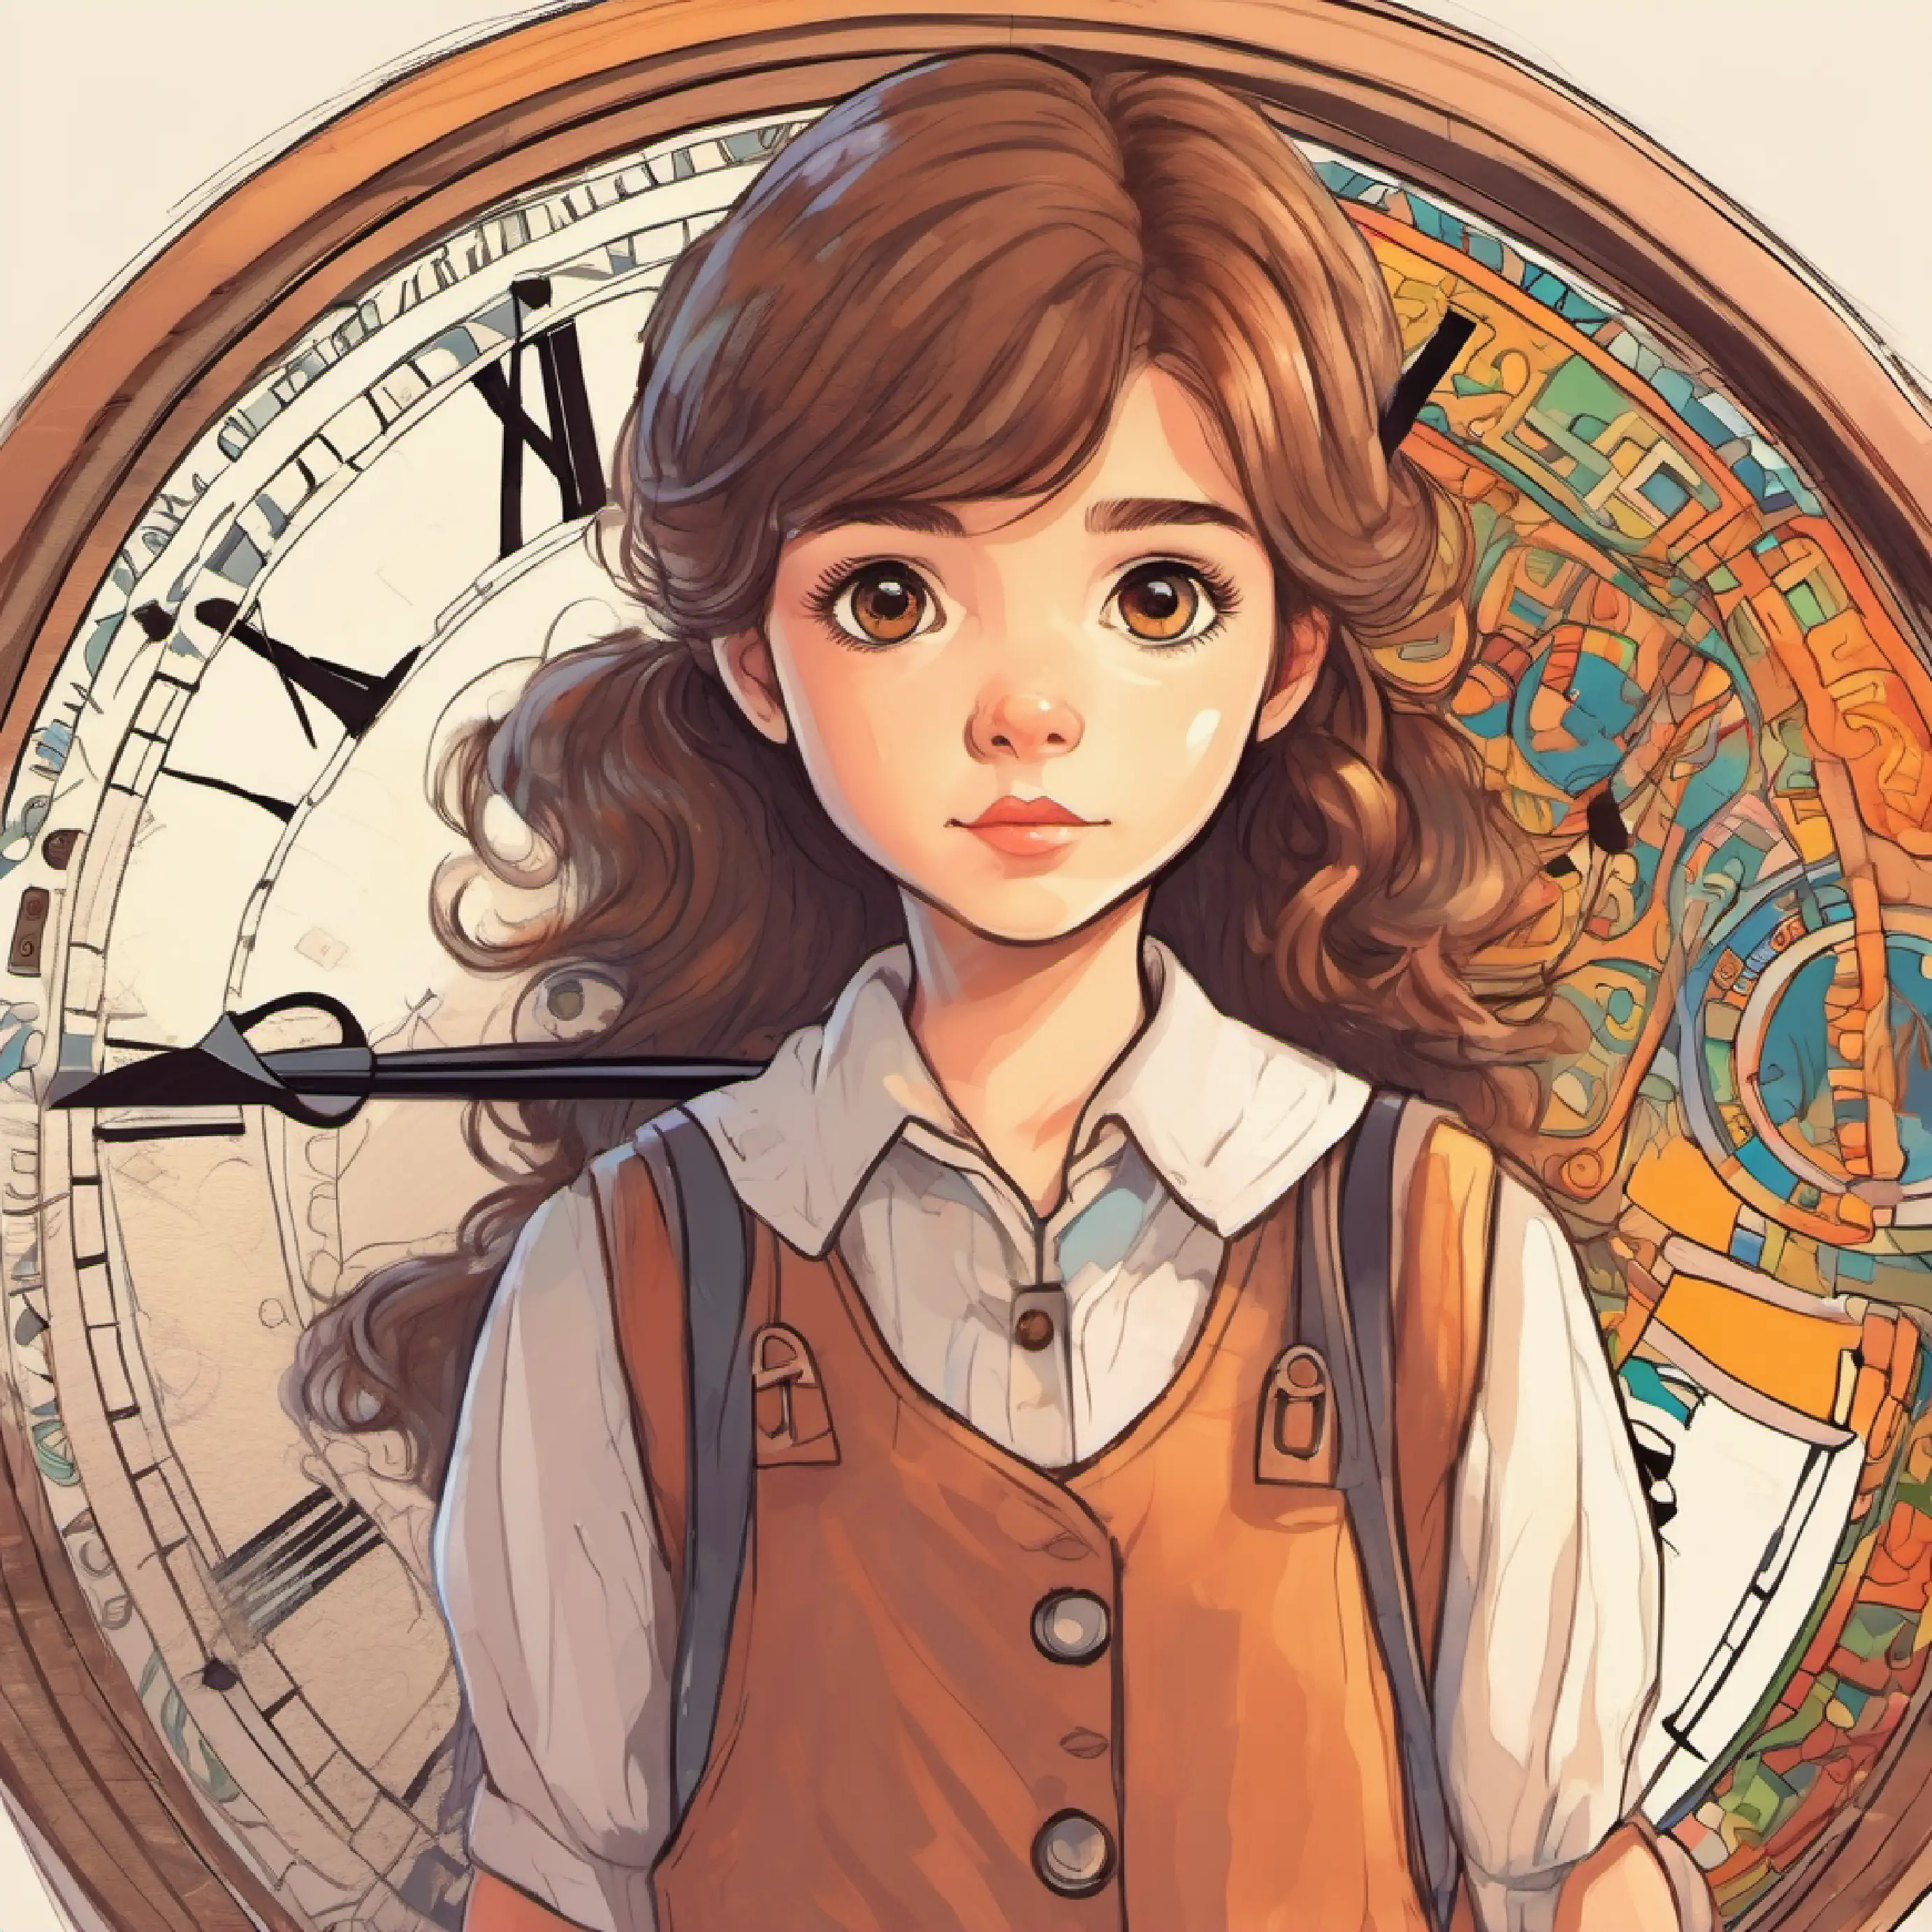 Curious girl with brown hair and hazel eyes following the clock's numbers